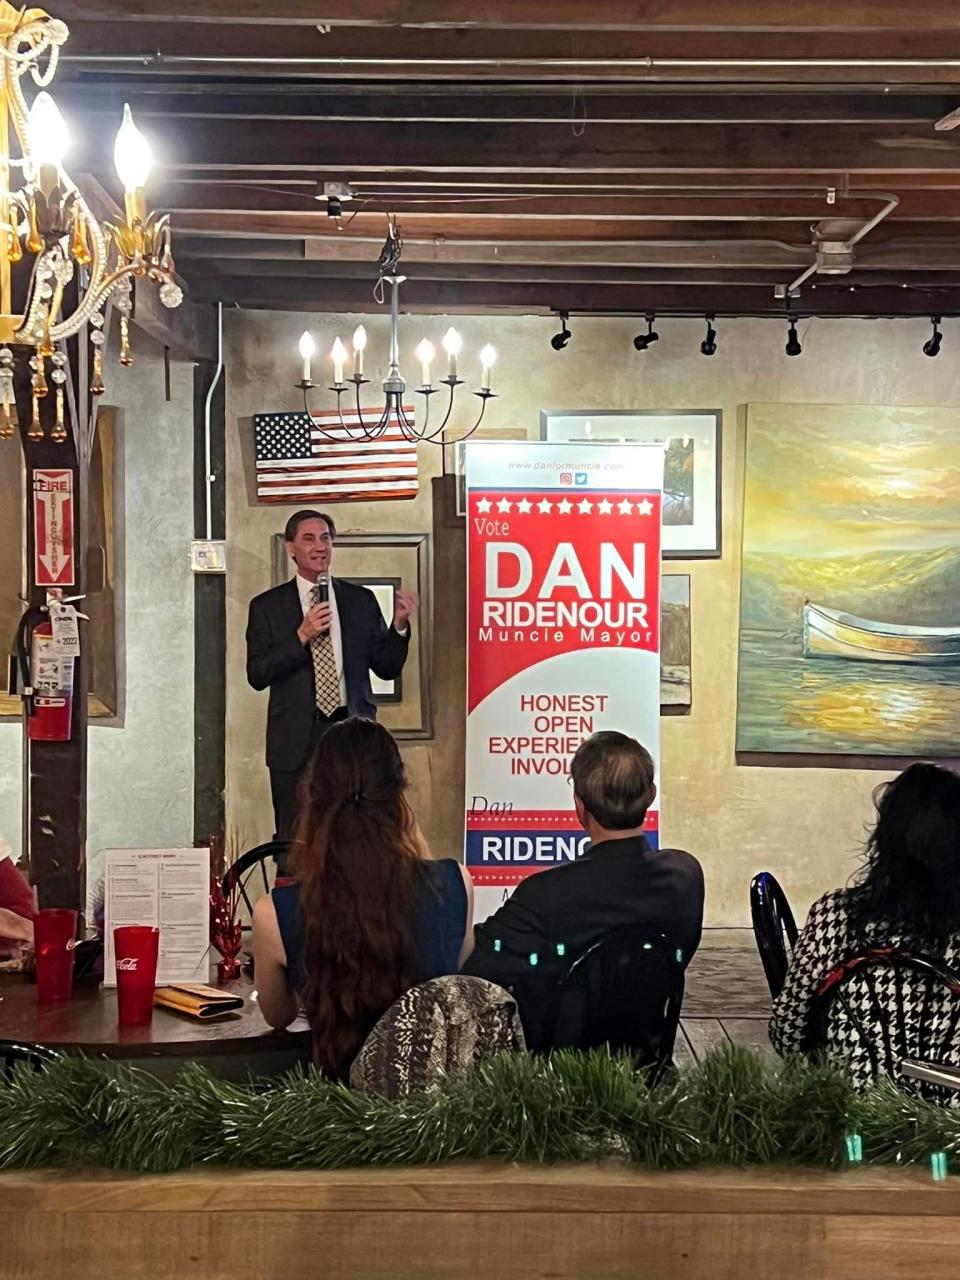 Muncie Mayor Dan Ridenour announces his bid for re-election Tuesday before a group of supporters at Elm Street Brewery.